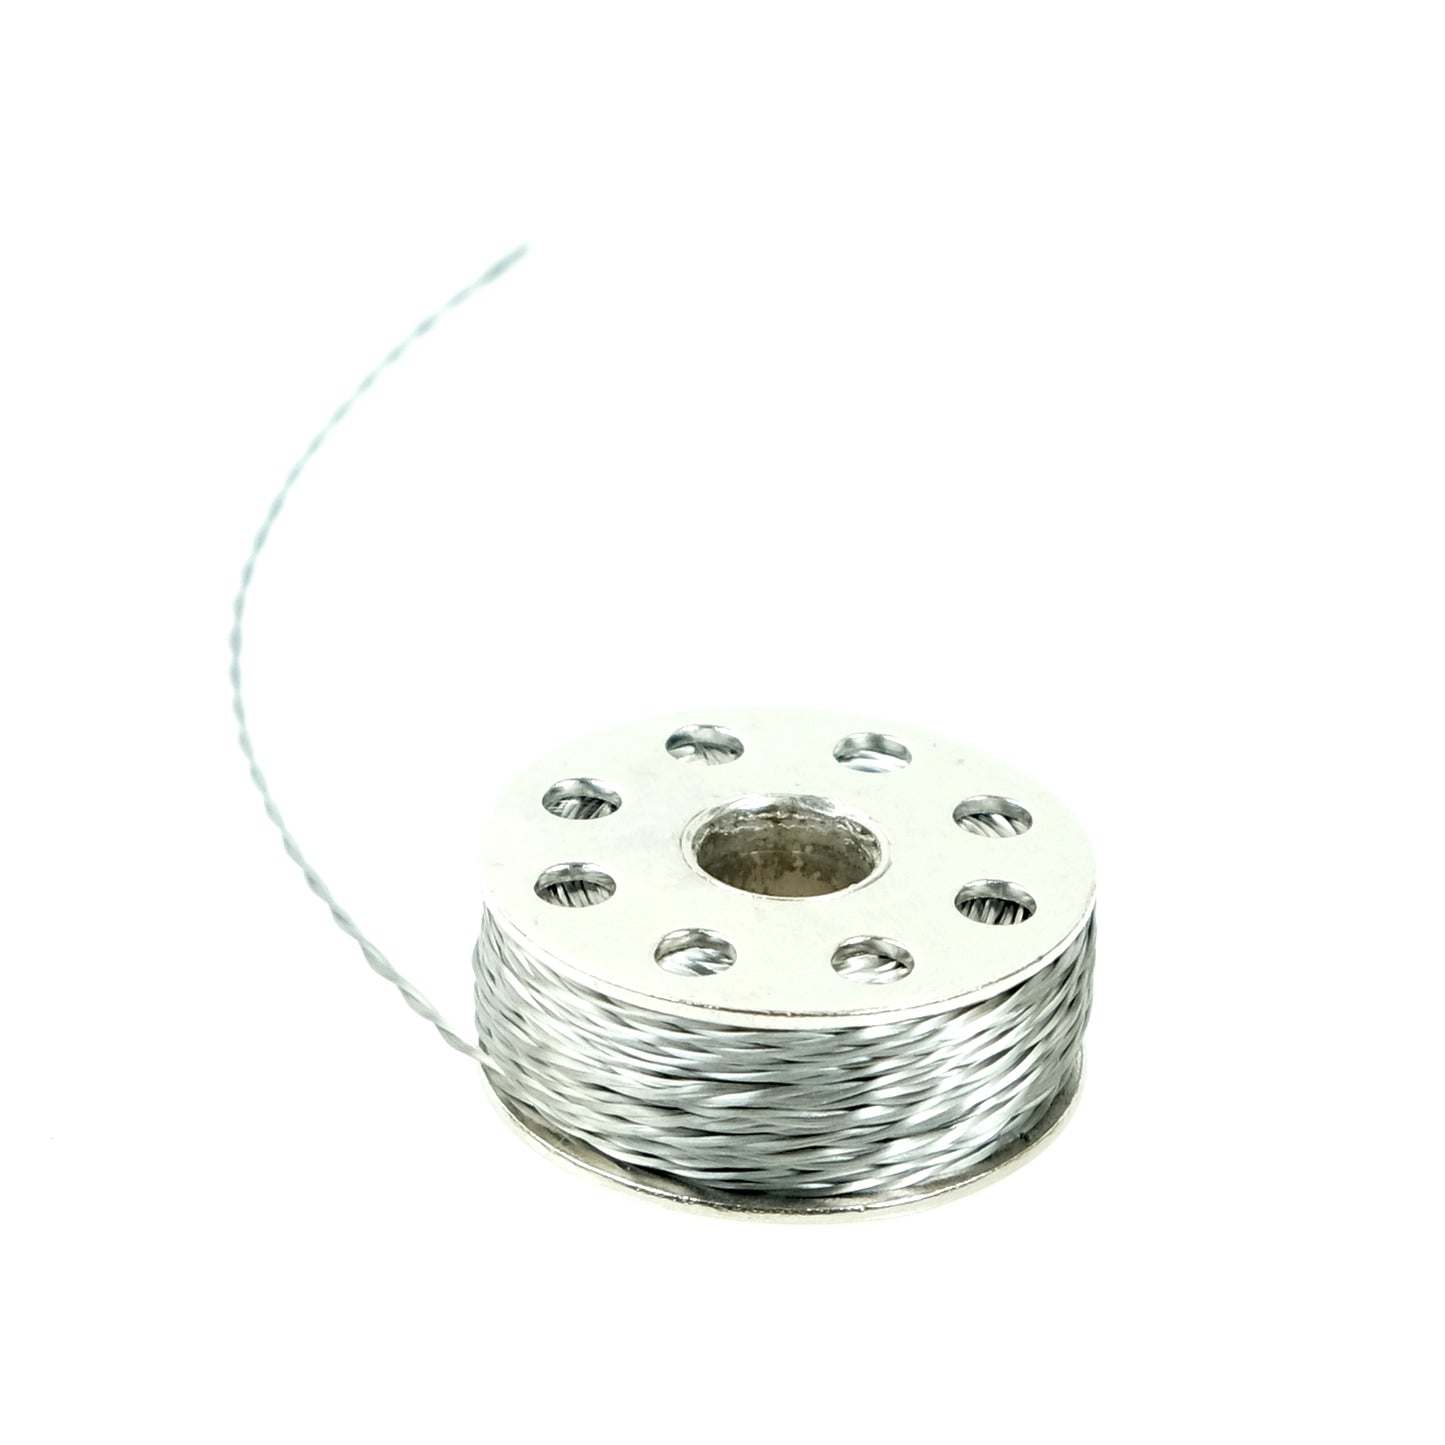 Stainless Conductive Thread for Wearables, 2 ply, 10 meter